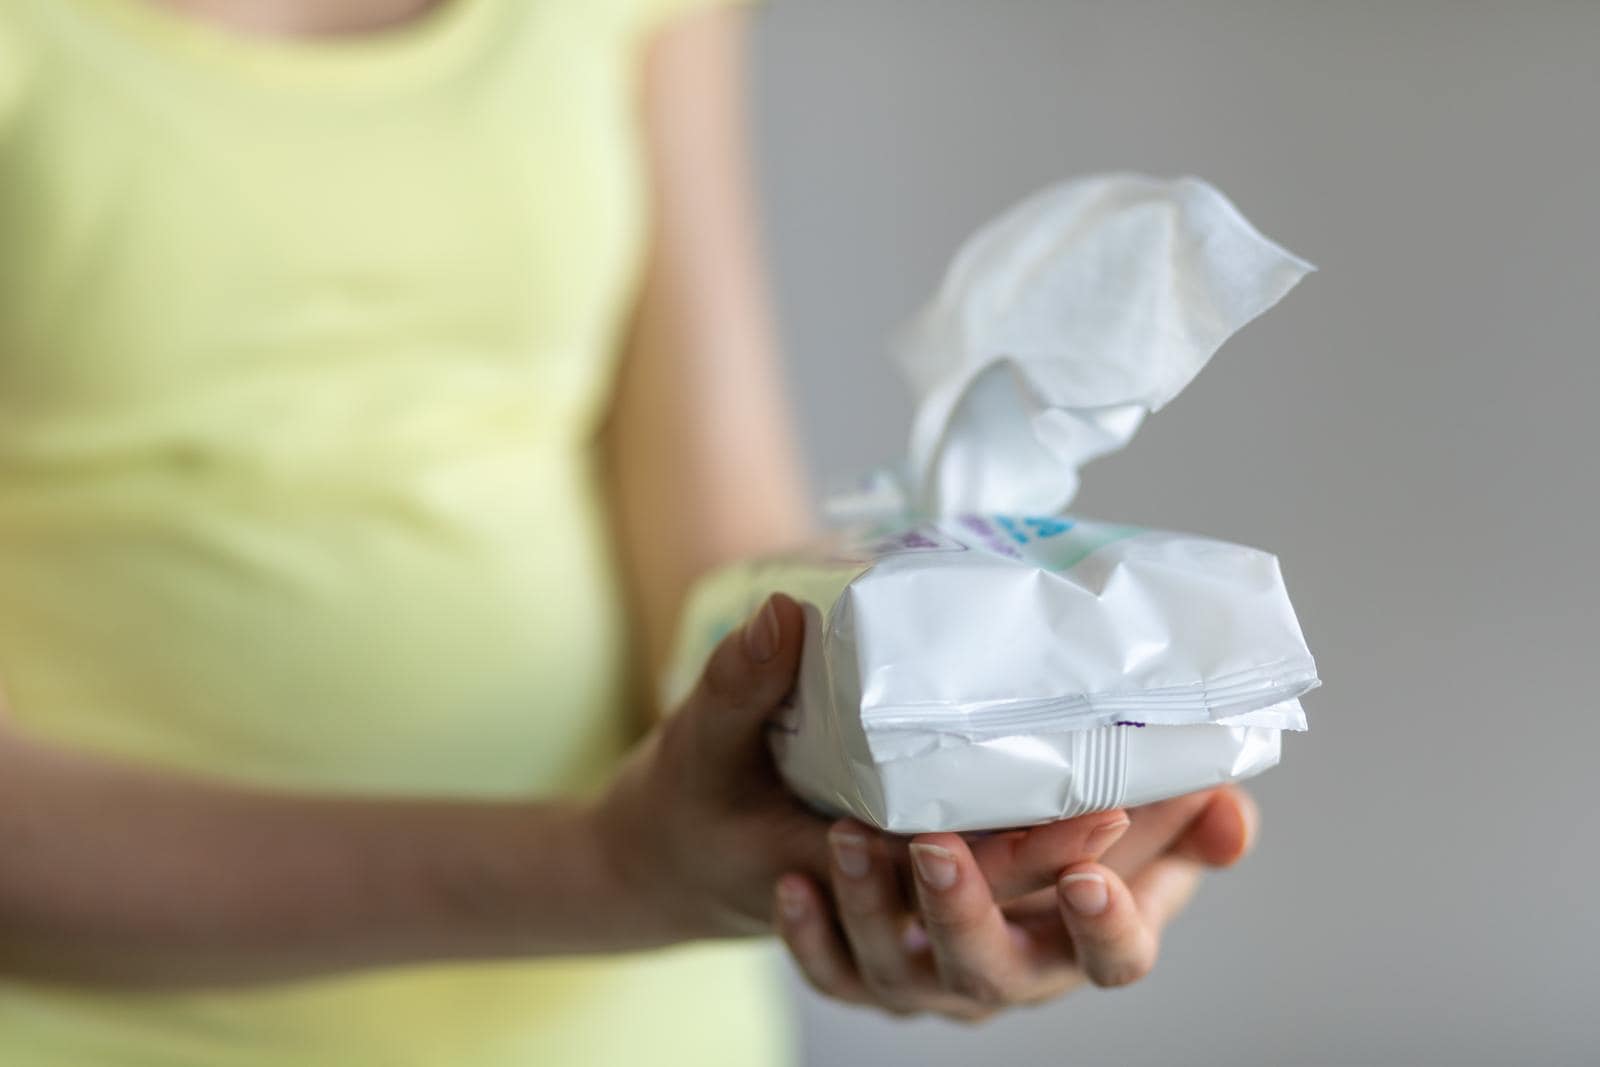 A woman is holding water baby wipes in her hands.